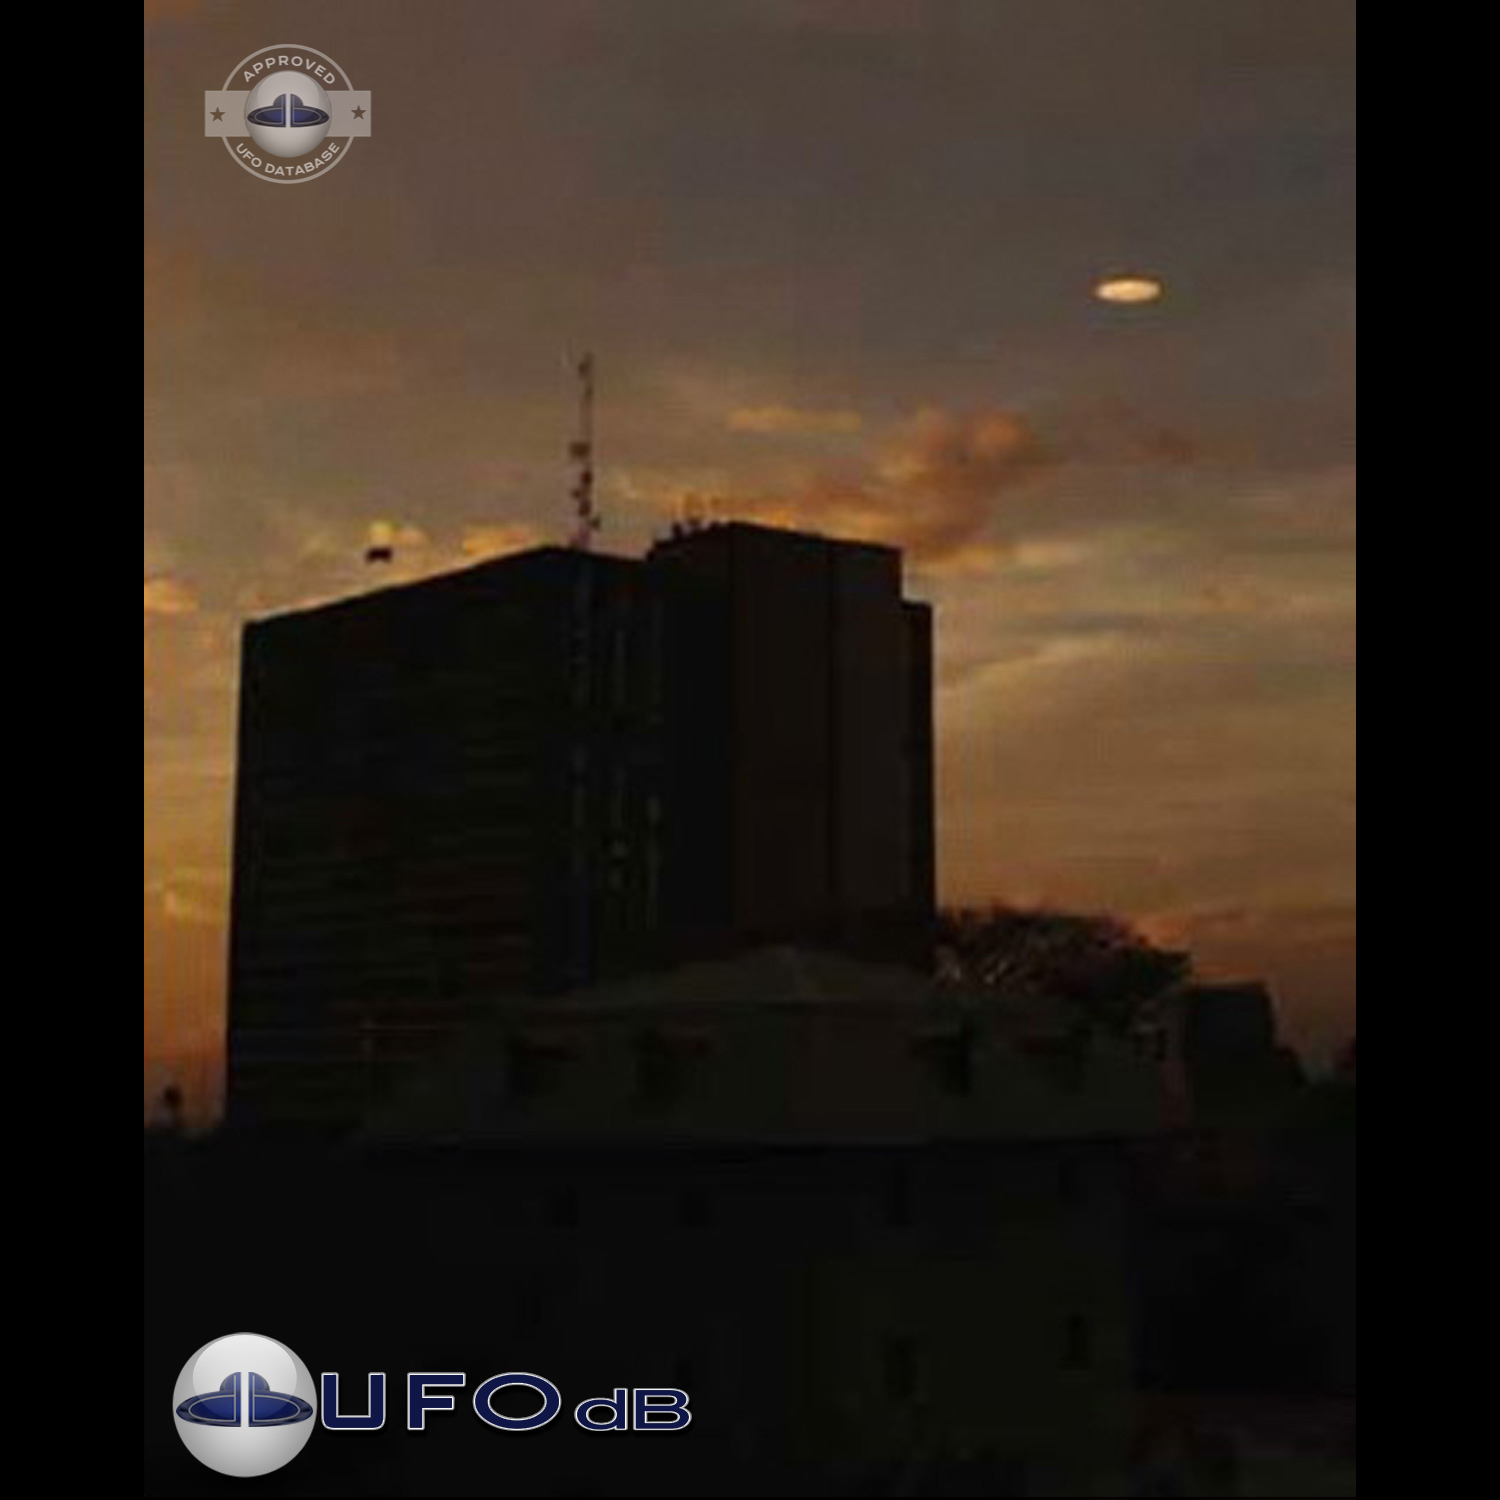 UFO picture showing a bright flat round disc passing near a building UFO Picture #54-1